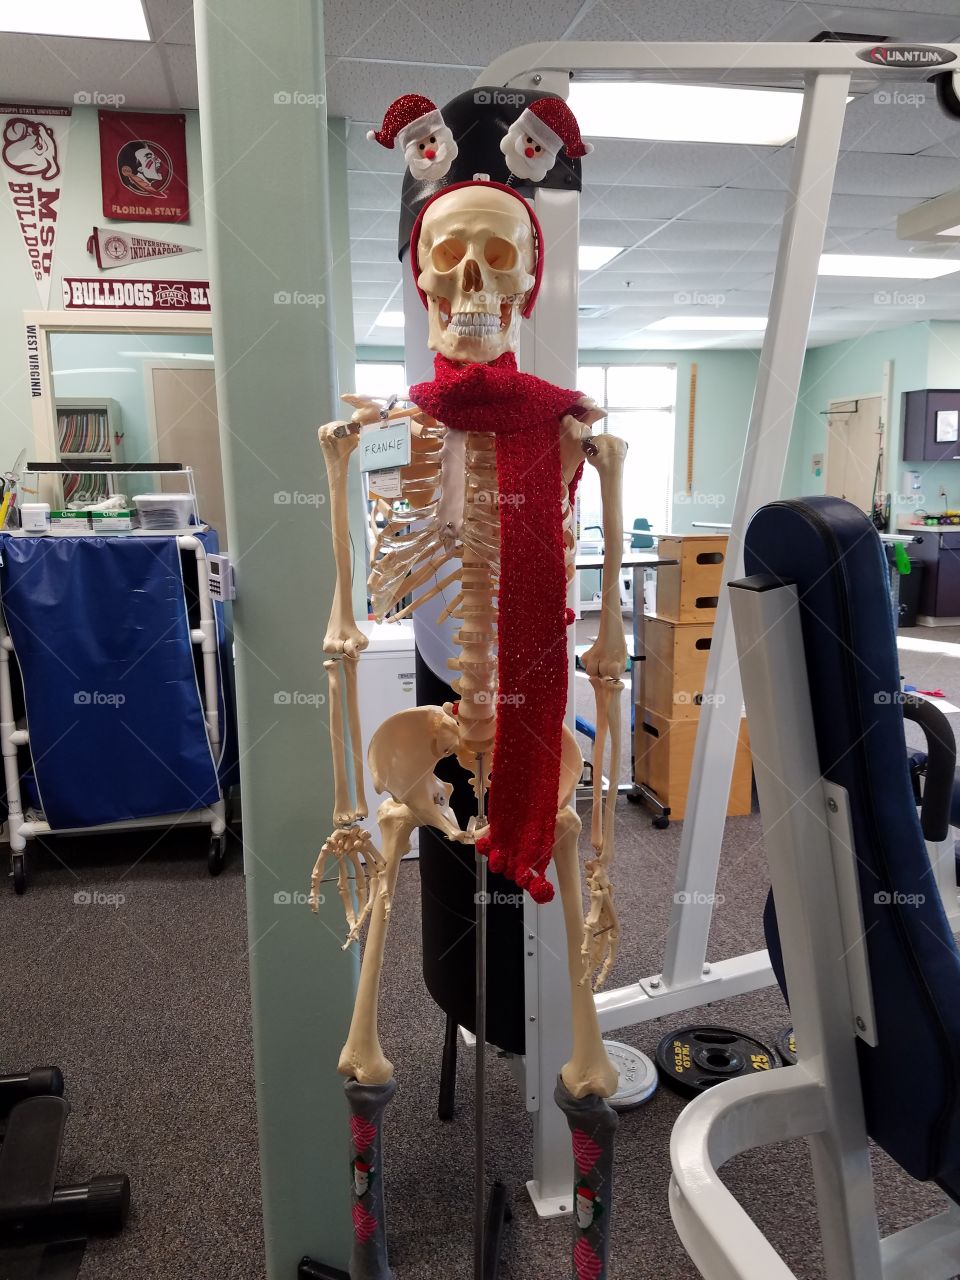 physical therapist humorous Christmas decoration